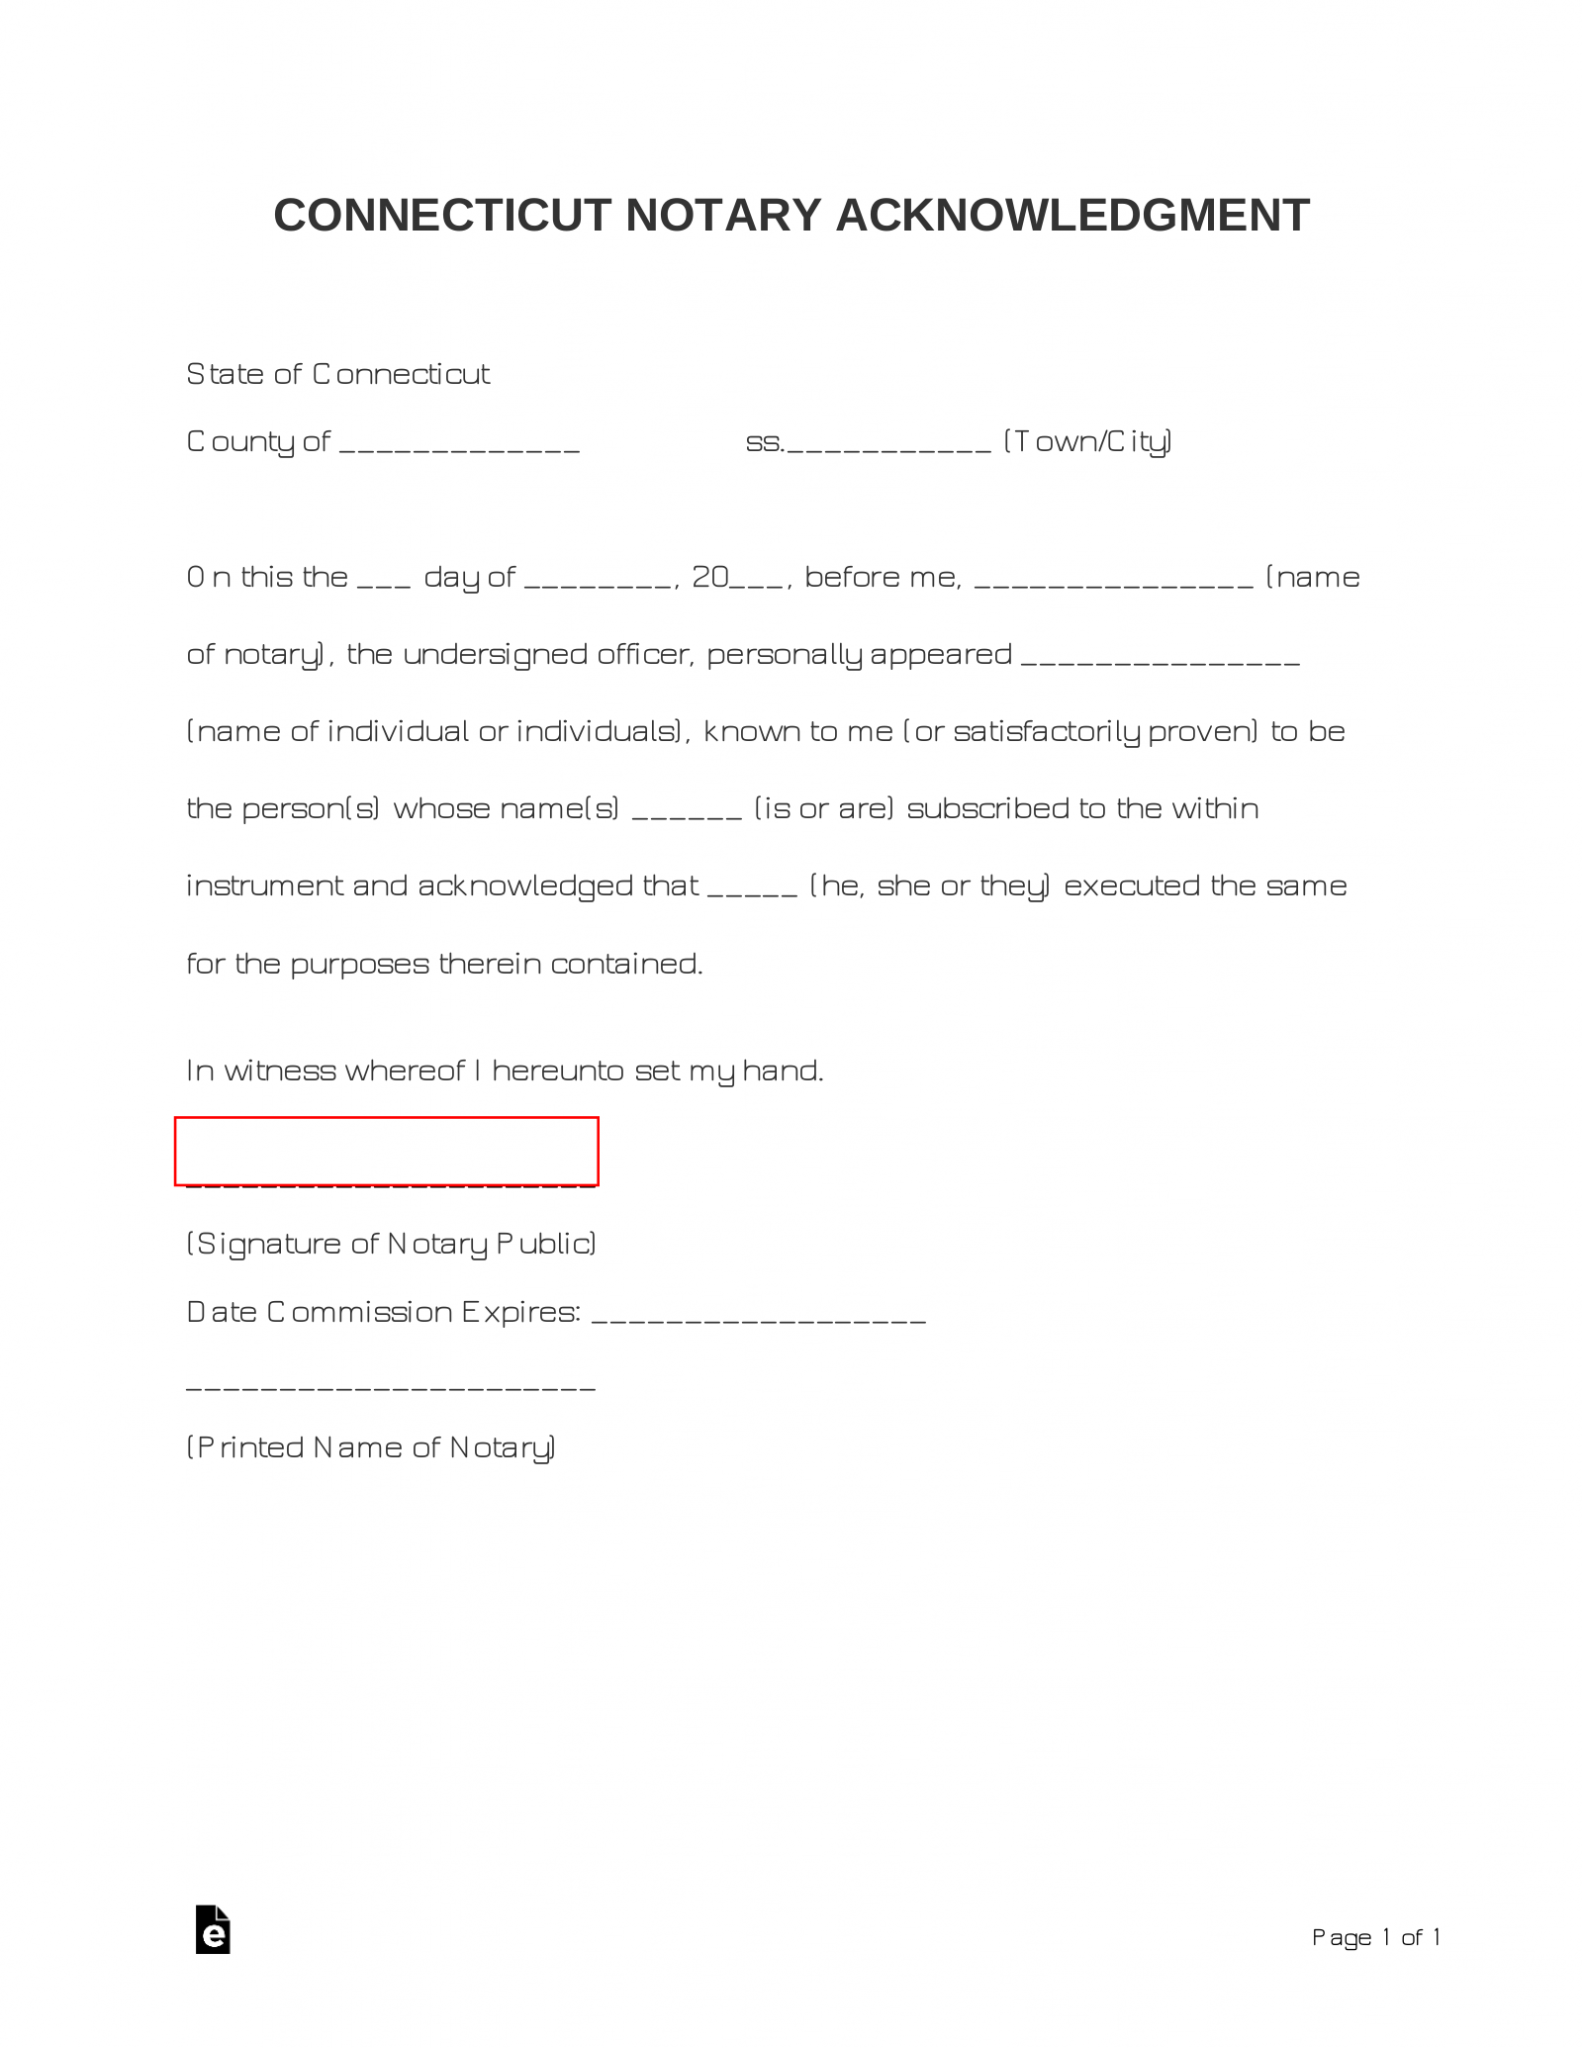 free-connecticut-notary-acknowledgment-form-pdf-word-eforms